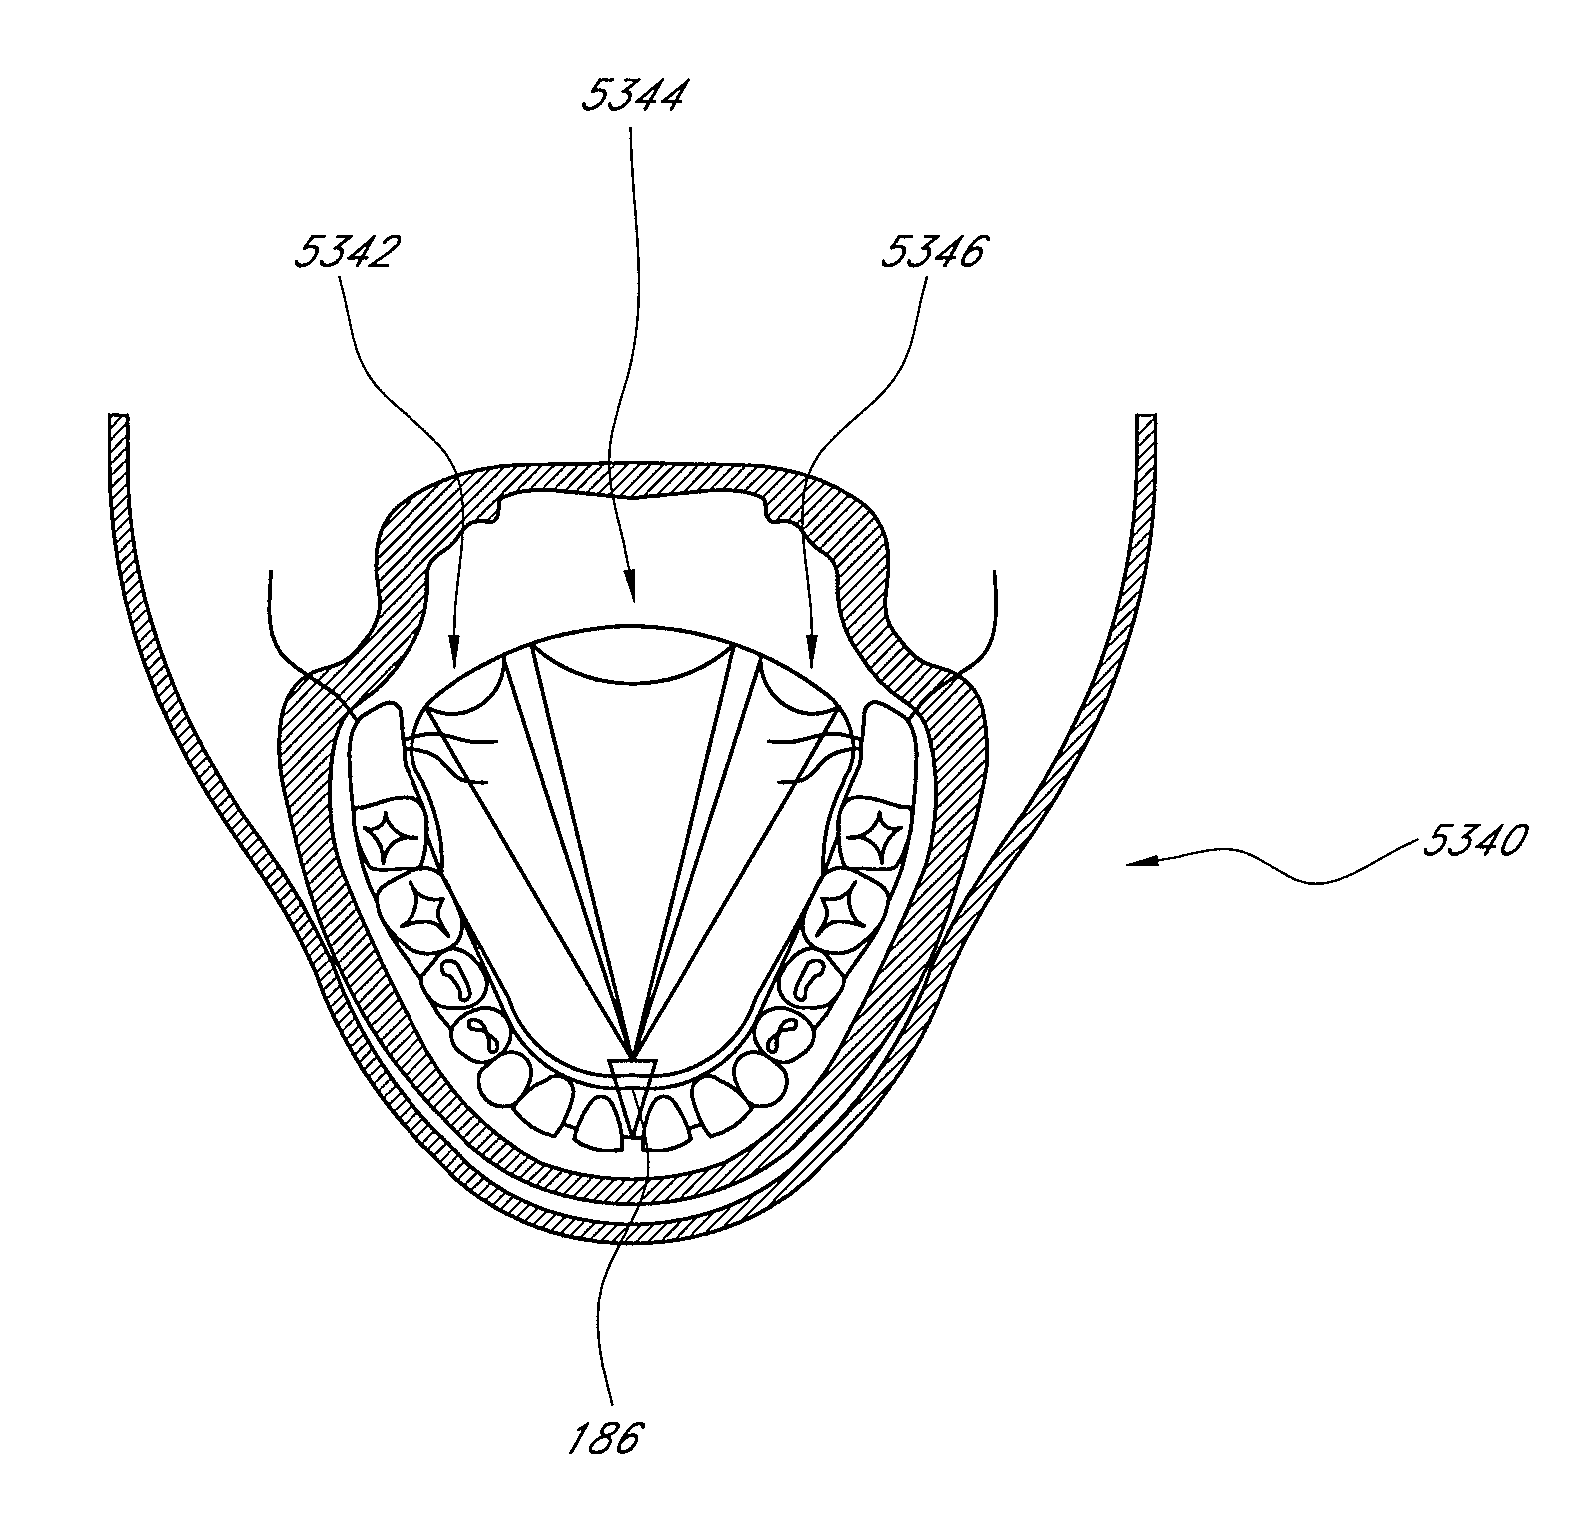 Methods and devices for the treatment of airway obstruction, sleep apnea and snoring